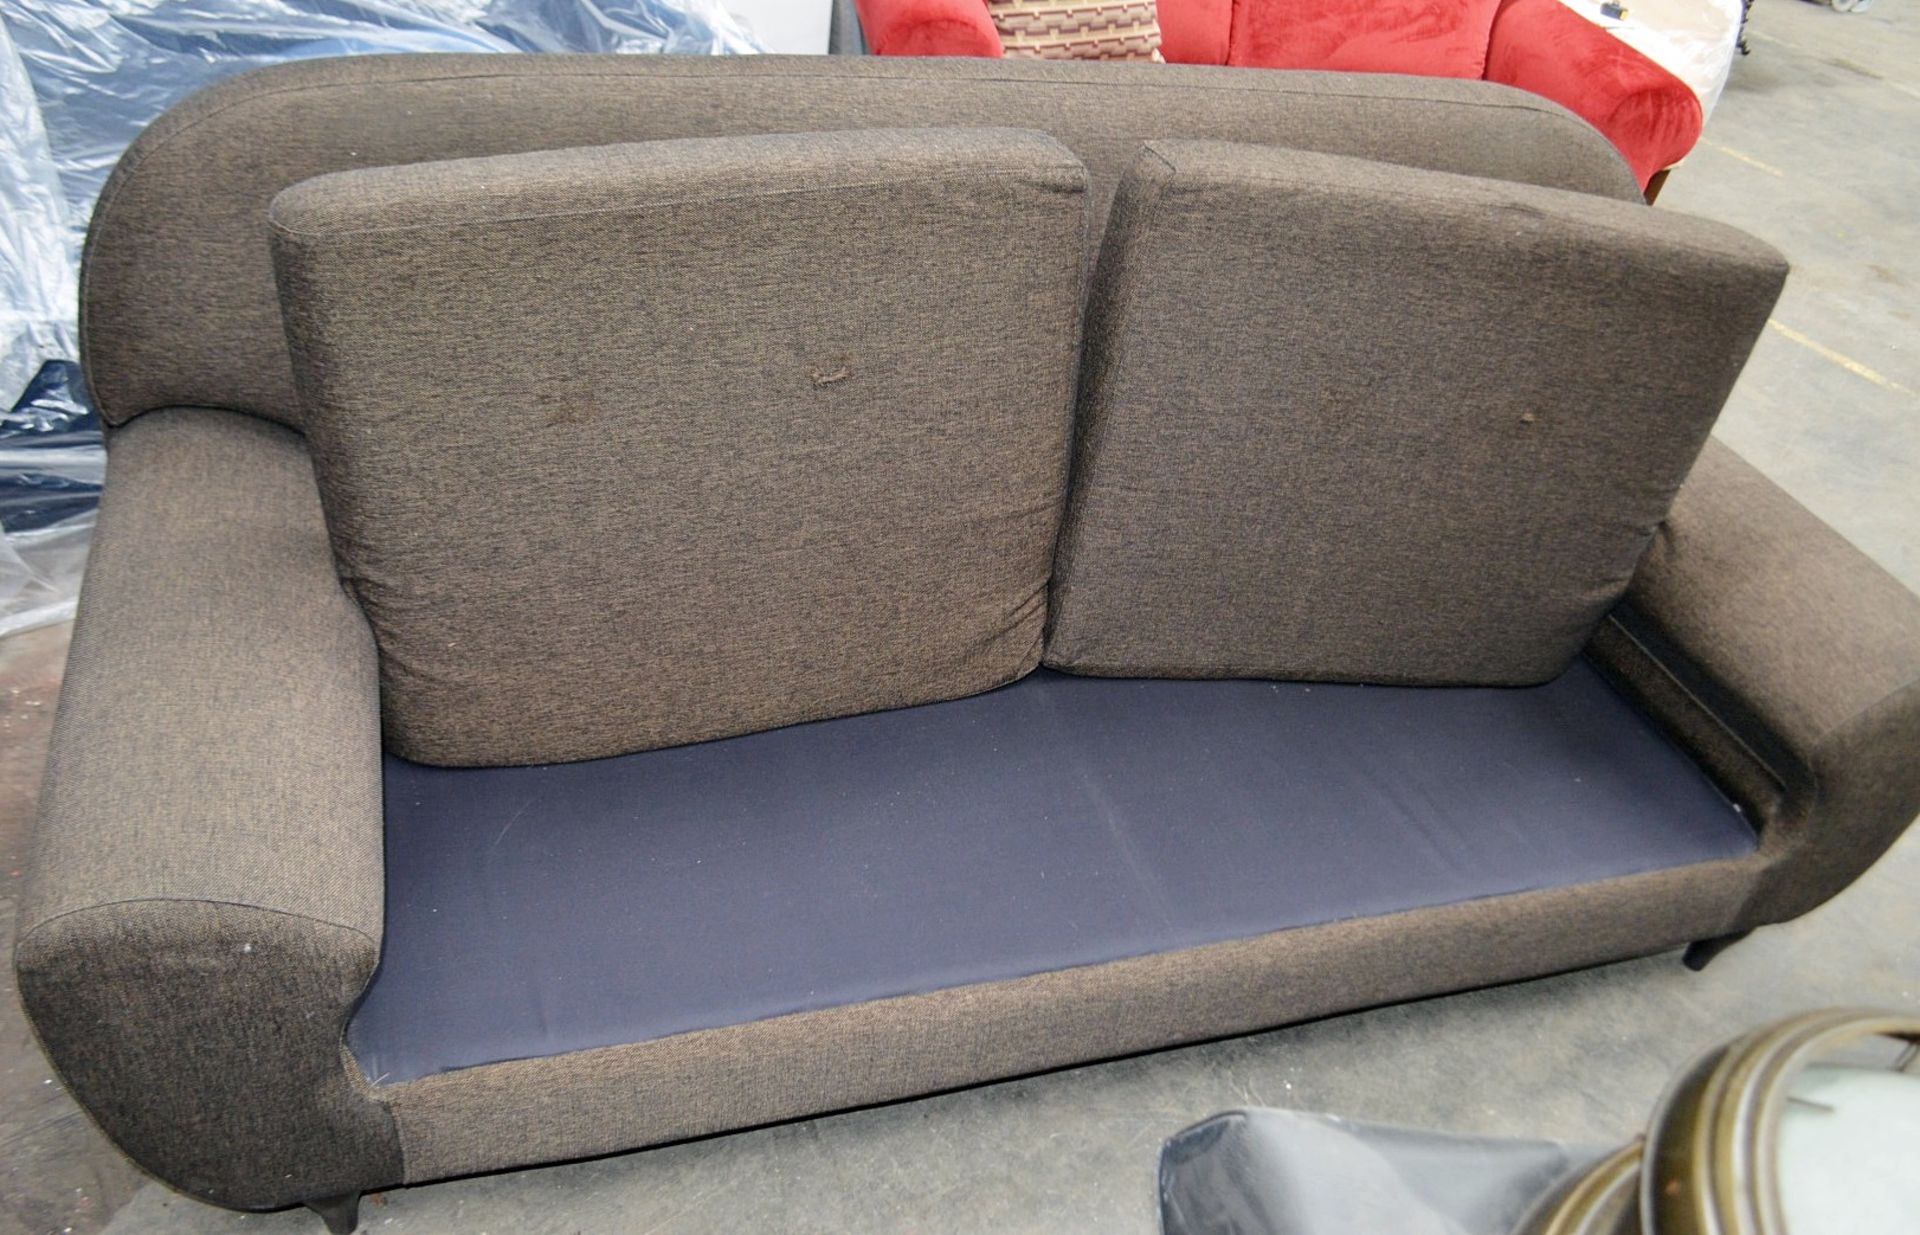 1 x Large Commercial 2-Metre Long Contemporary Sofa In A  Dark Brown/Bronze Woven Fabric - - Image 5 of 6